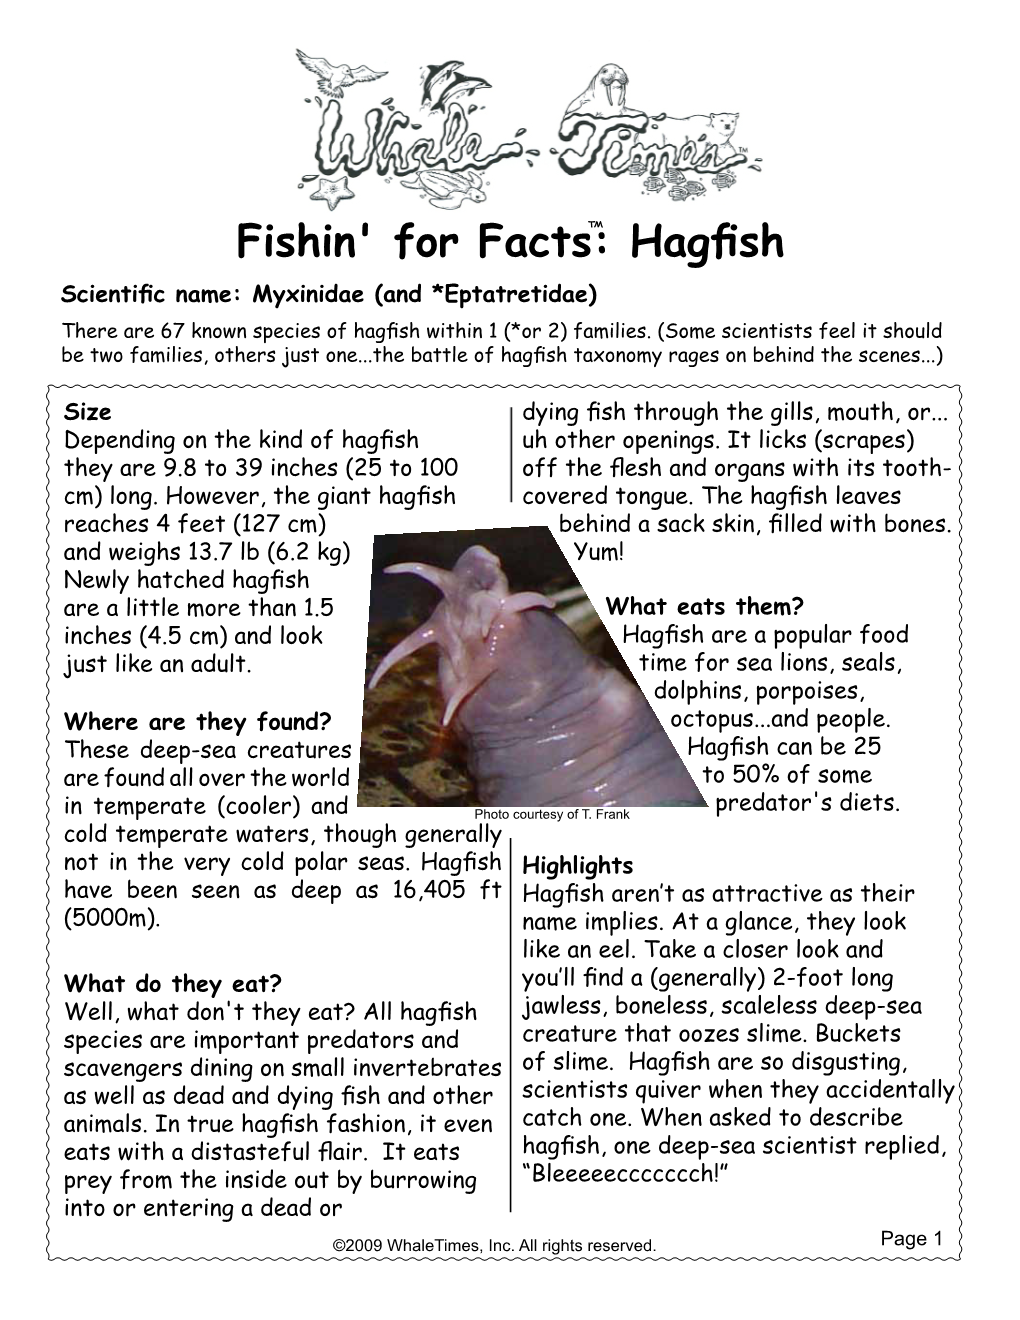 Fishin' for Facts: Hagfish Scientific Name: Myxinidae (And *Eptatretidae) There Are 67 Known Species of Hagfish Within 1 (*Or 2) Families